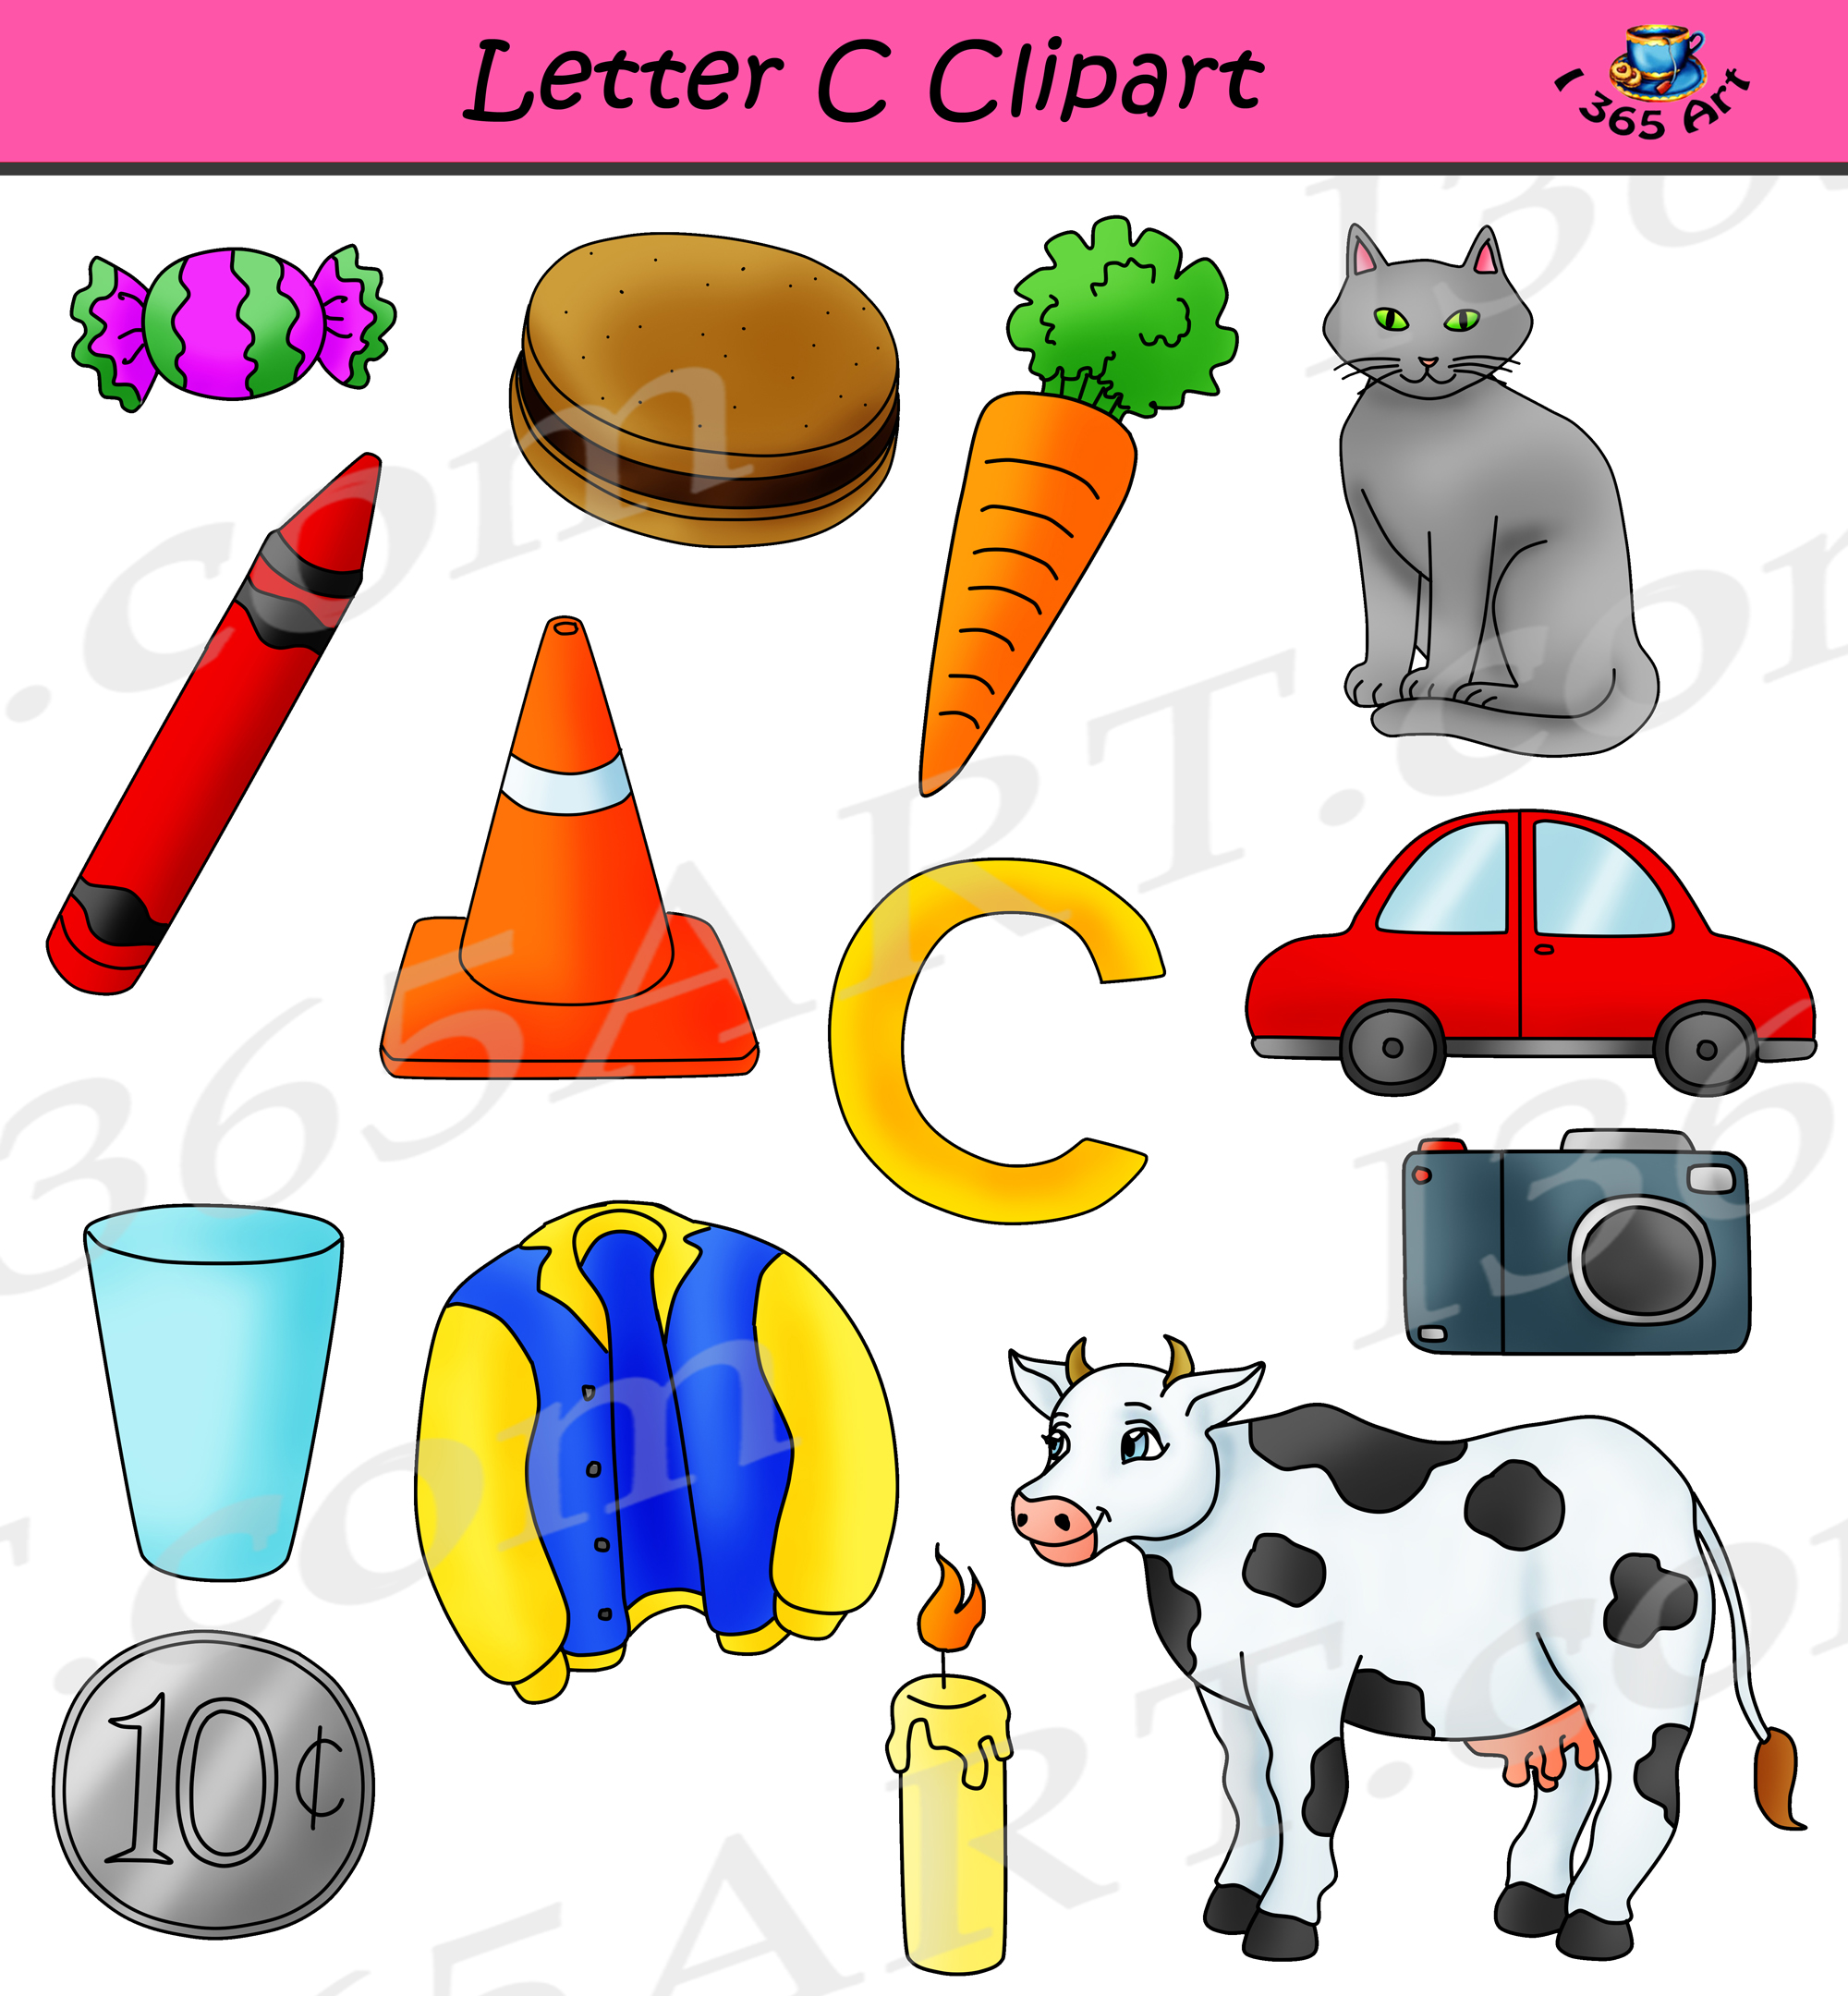 alphabets-clipart-pack-letters-a-to-d-now-available-clipart-4-school